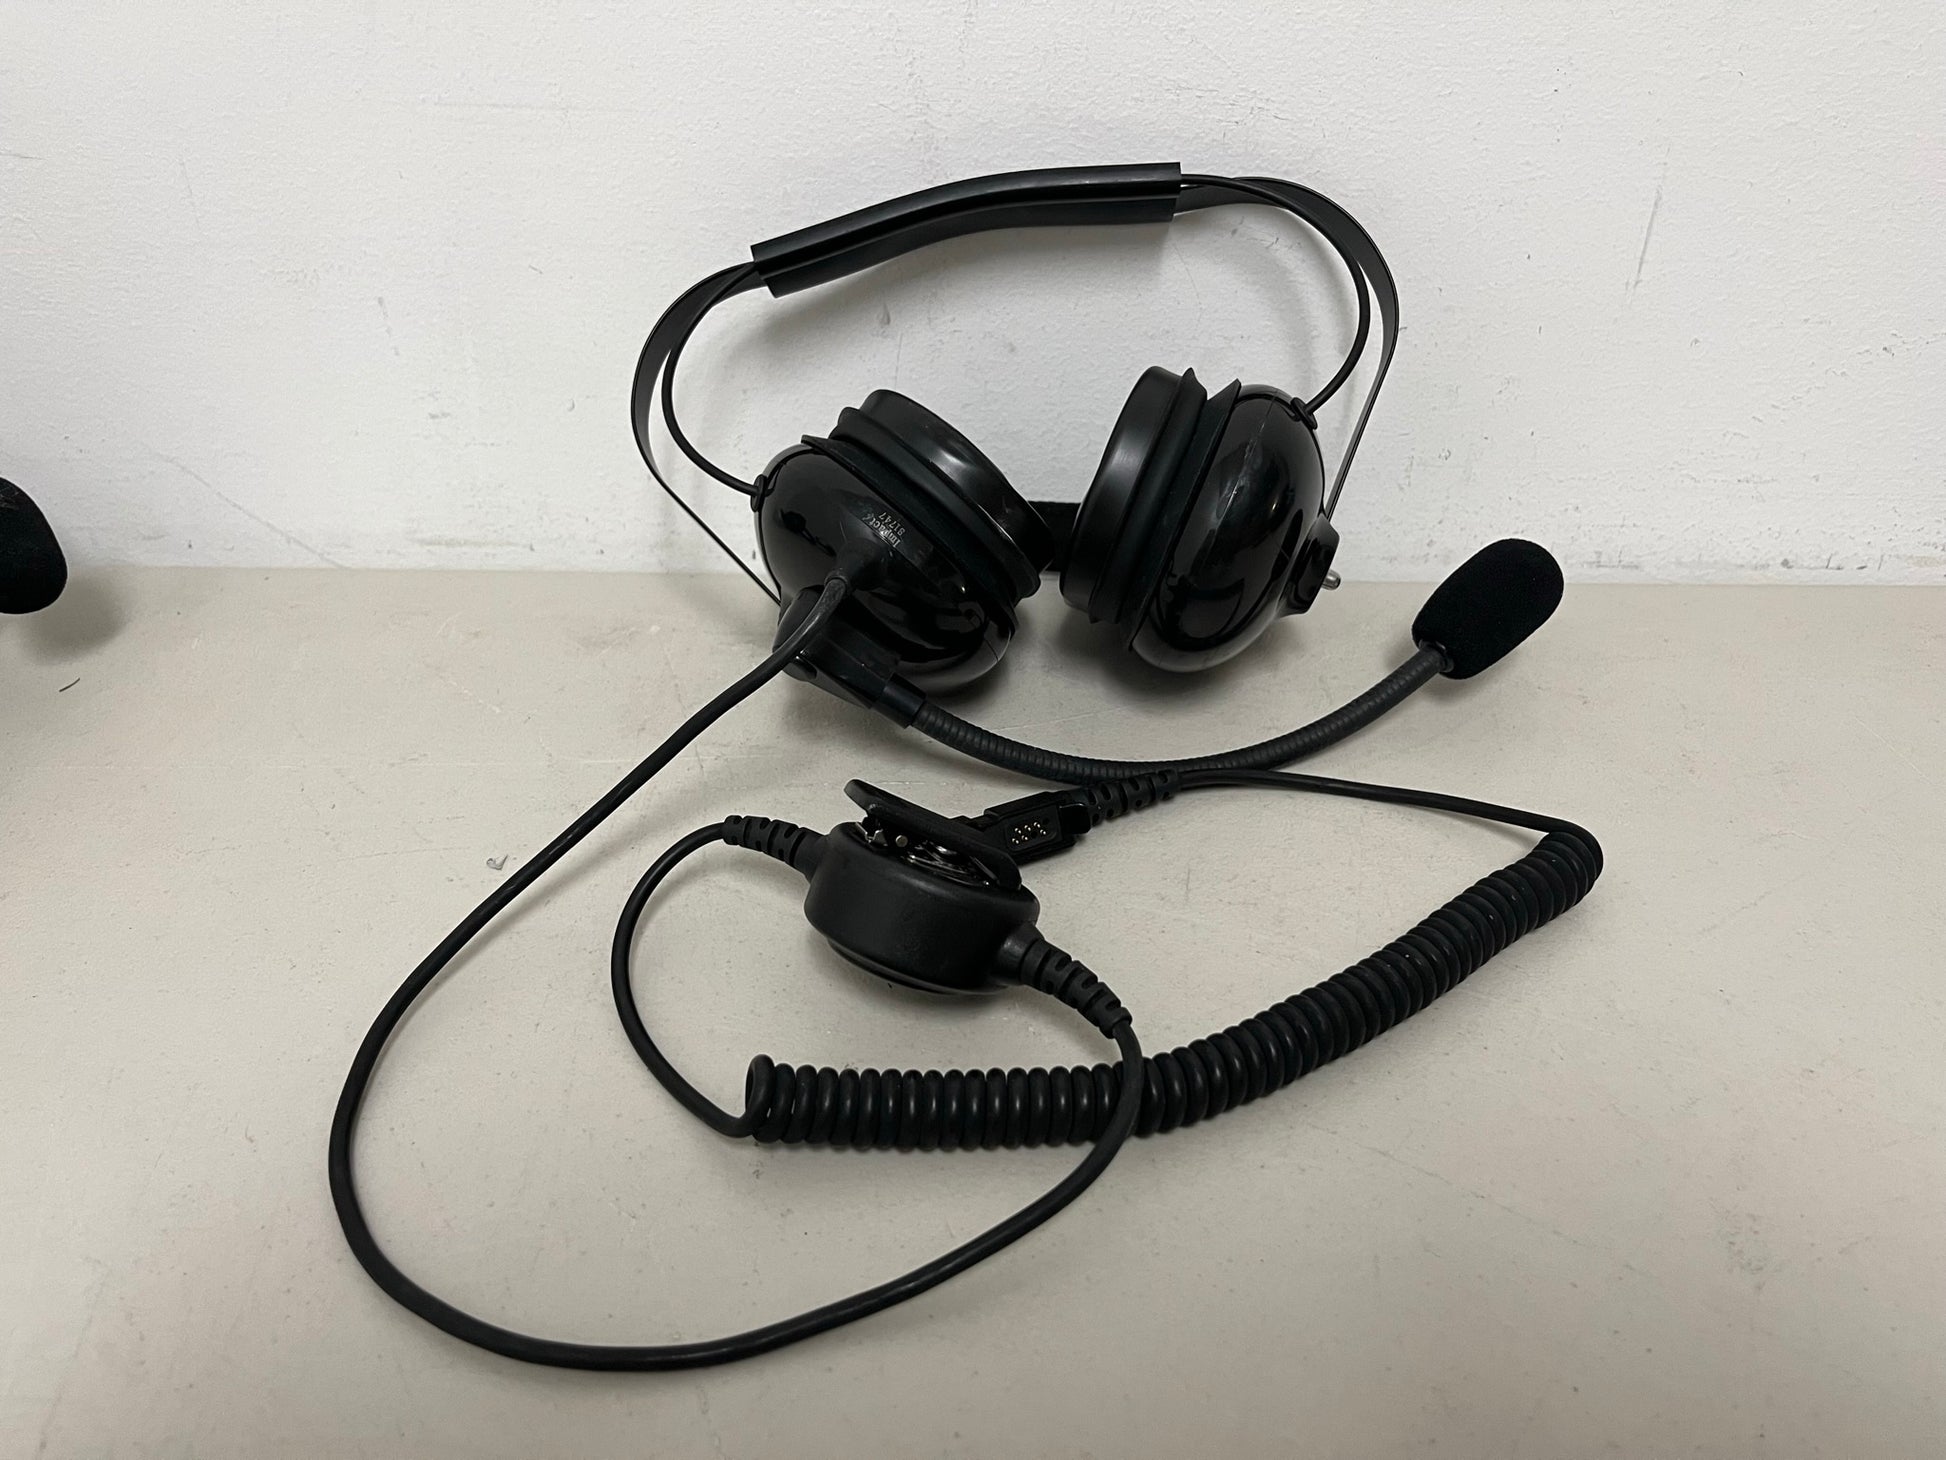 Used Impact Behind The Head Dual Muff Headsets, We Sell Professional Audio Equipment. Audio Systems, Amplifiers, Consoles, Mixers, Electronics, Entertainment, Sound, Live.